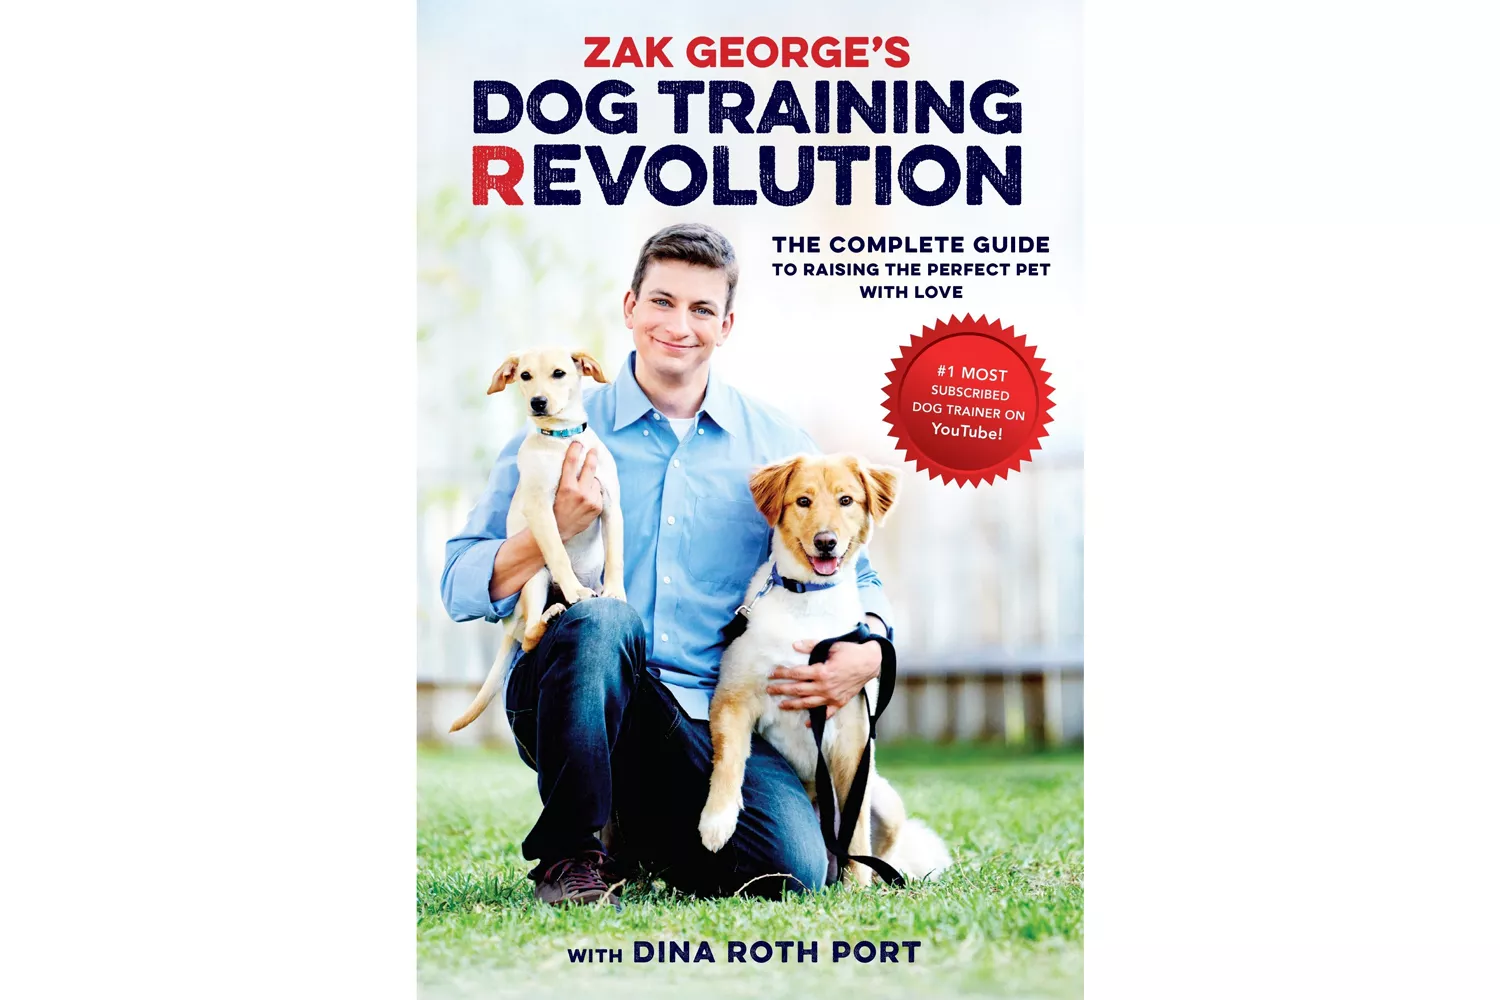 Zak George's Dog Training Revolution The Complete Guide to Raising the Perfect Pet with Love